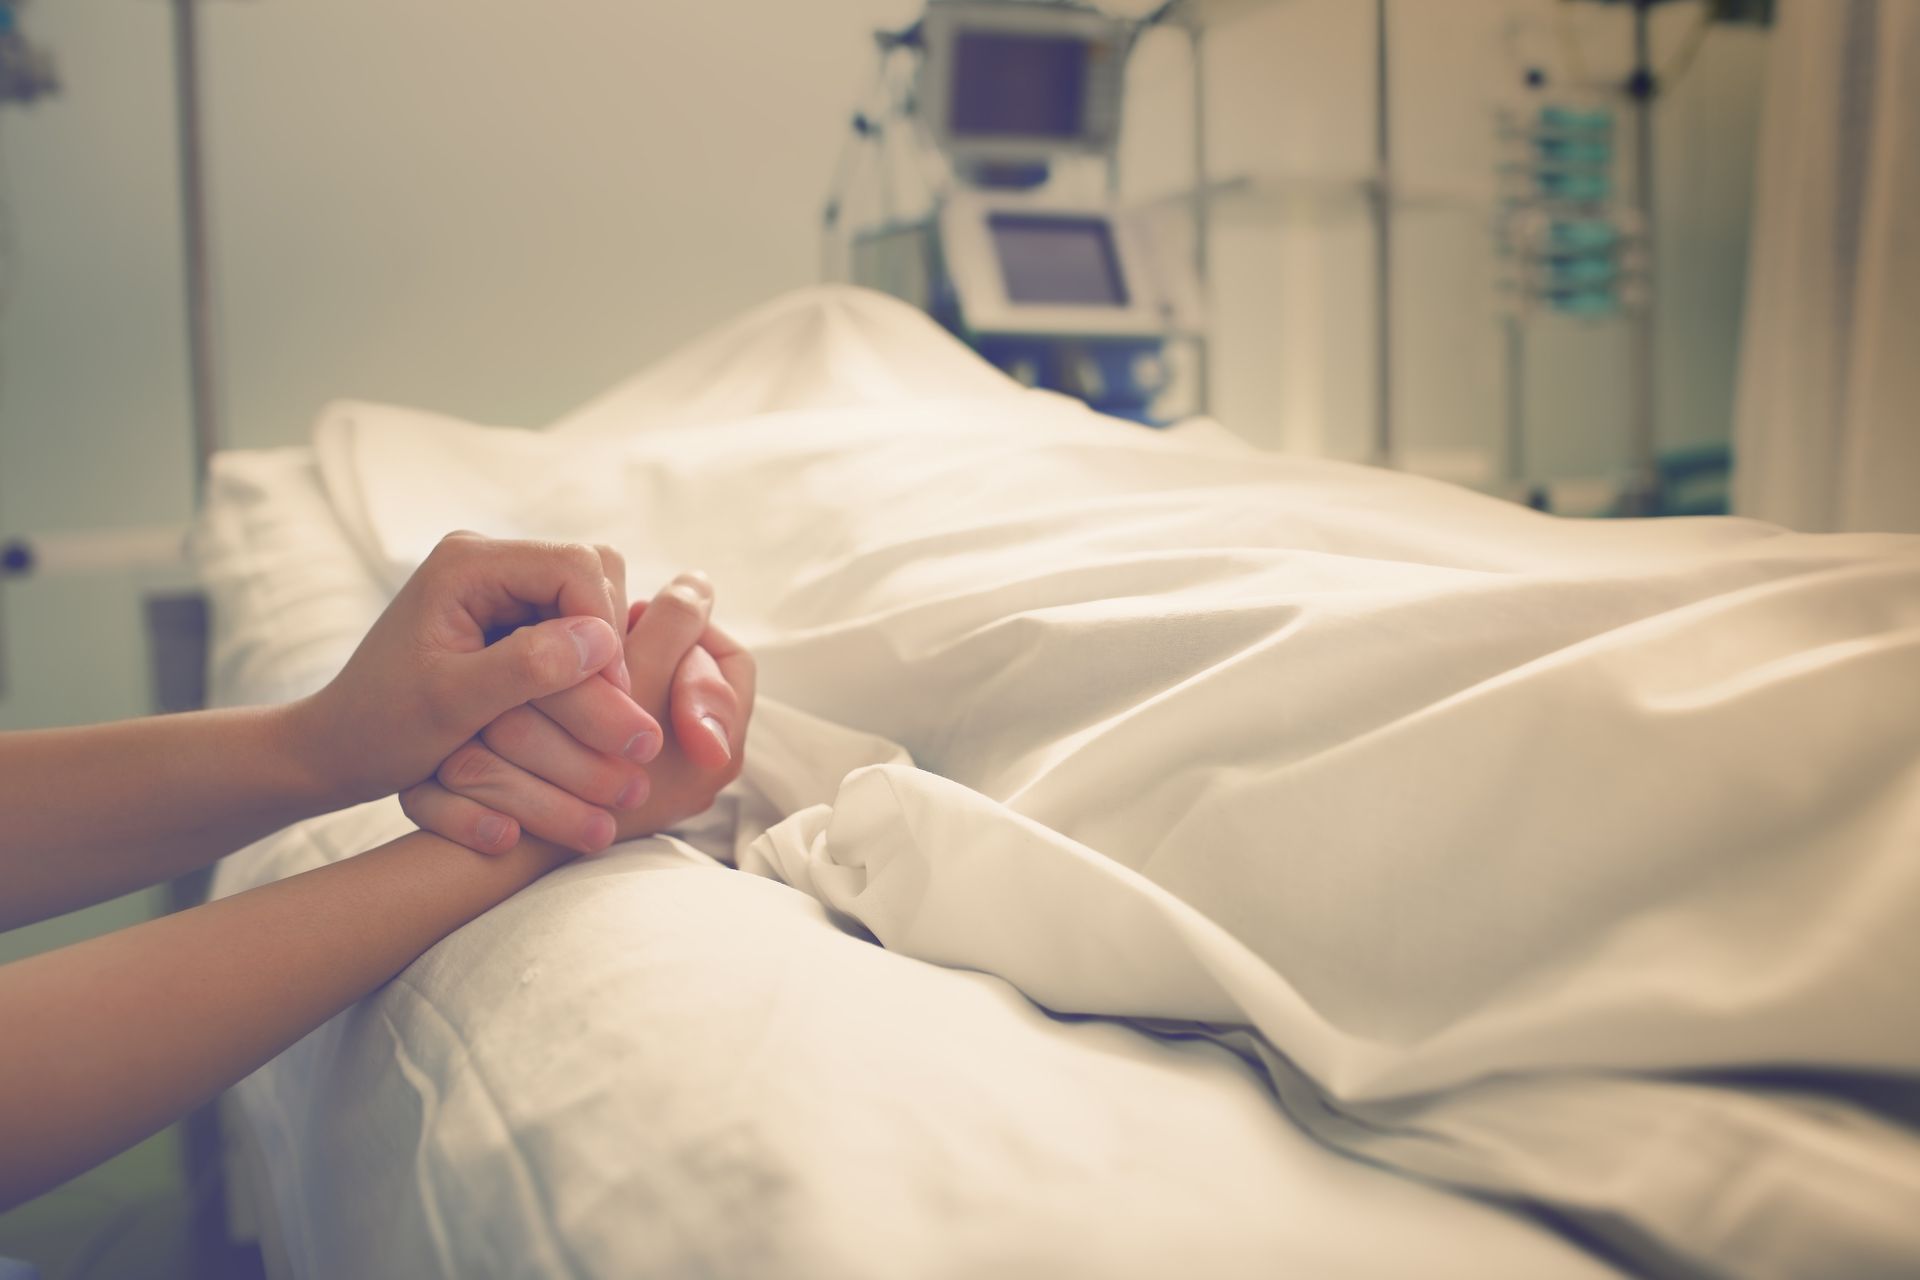 holding hand of someone who died in hospital